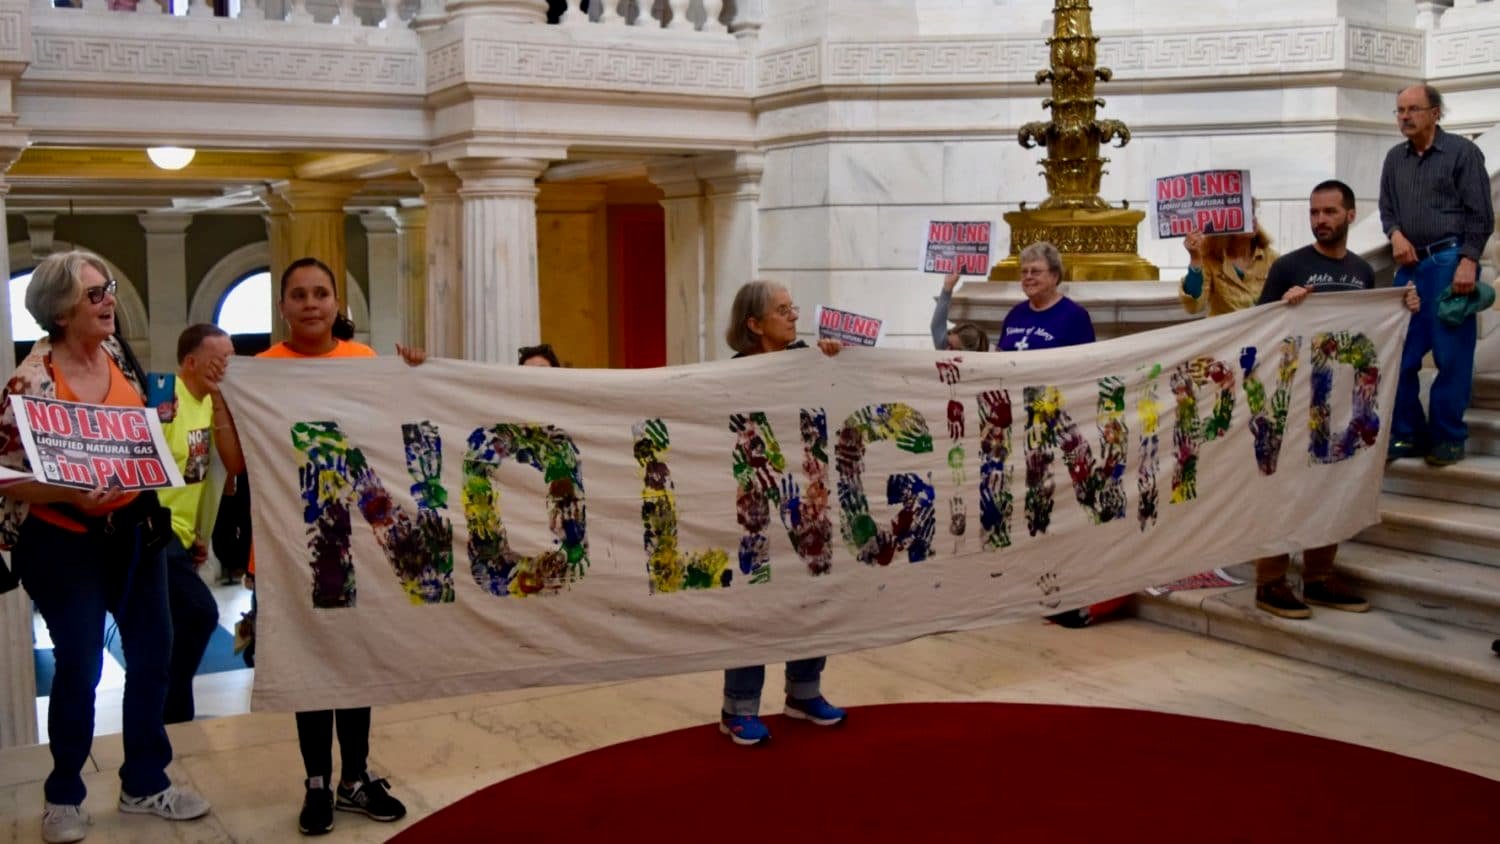 Rhode Island: No LNG in PVD! floods the State House